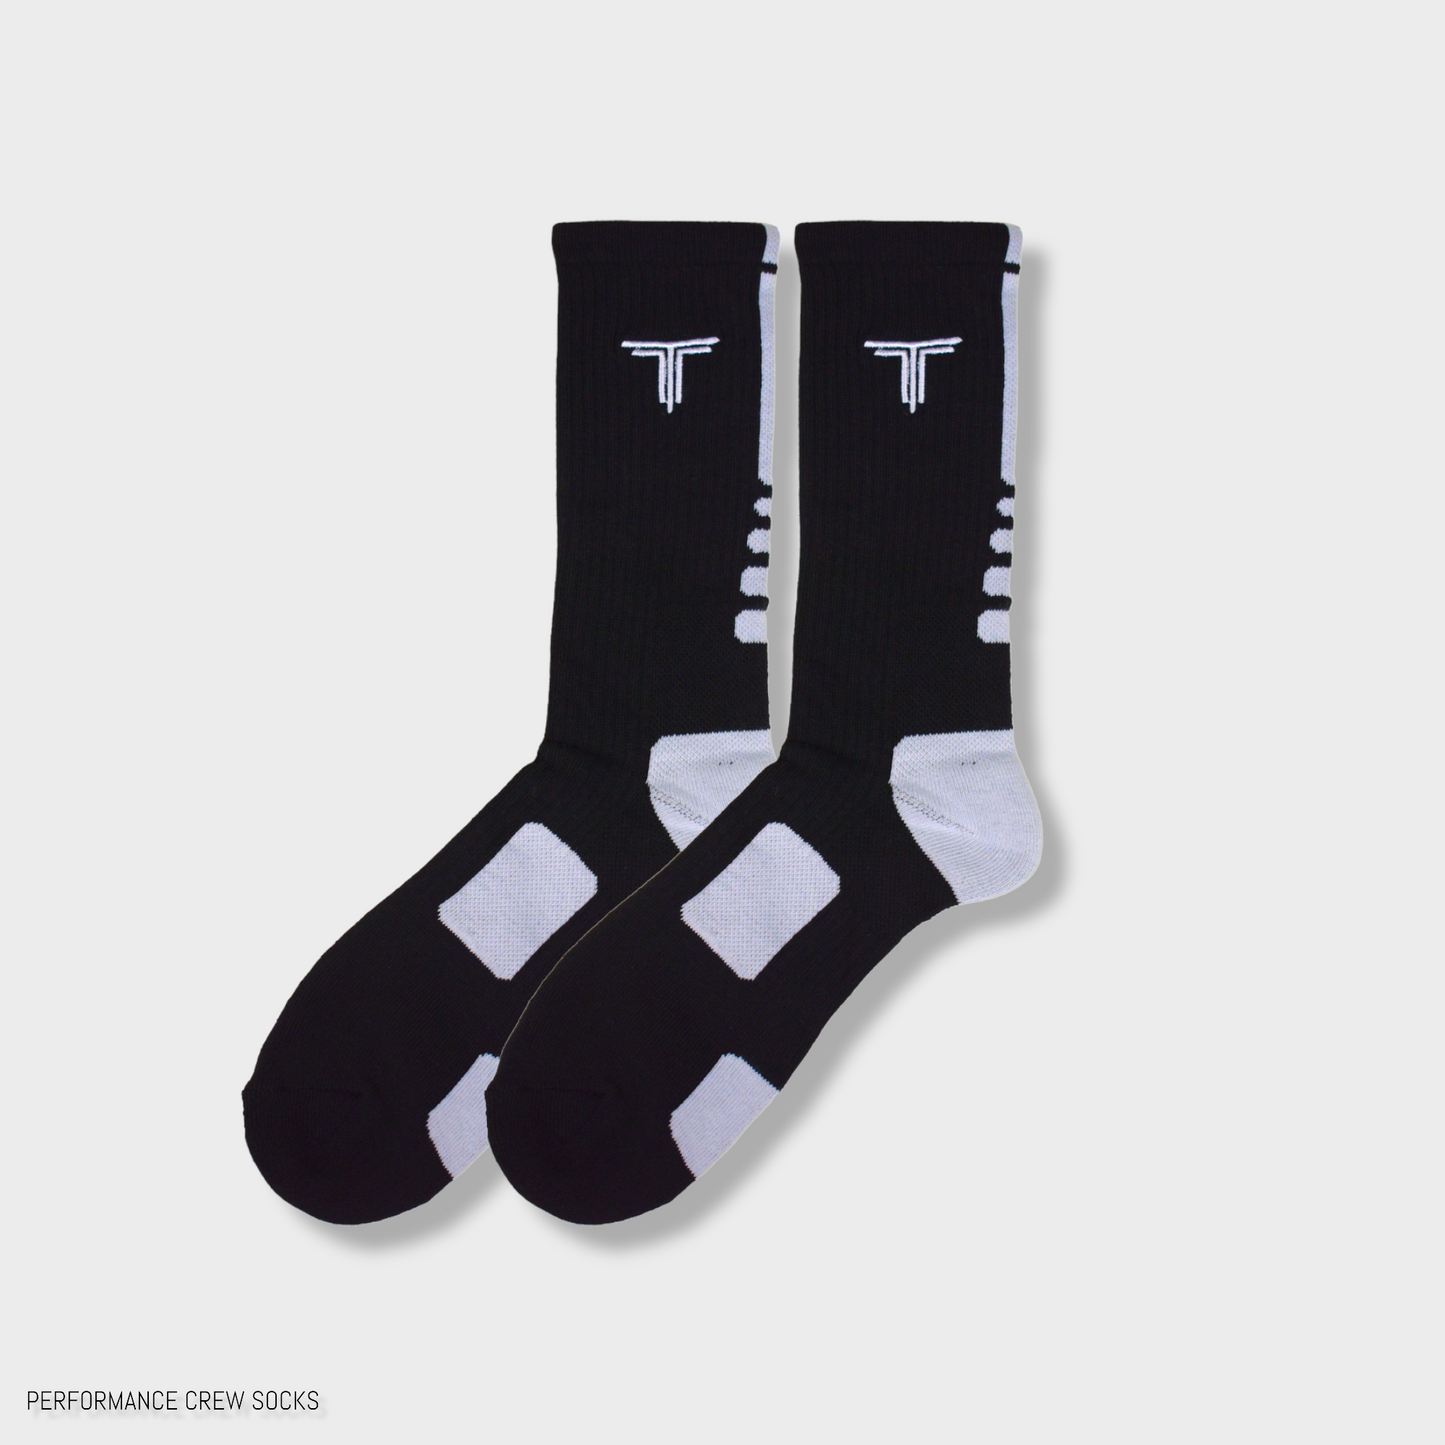 PERFORMANCE ATHLETIC CREW SOCKS - WHITE/RED - Lineage Athletics